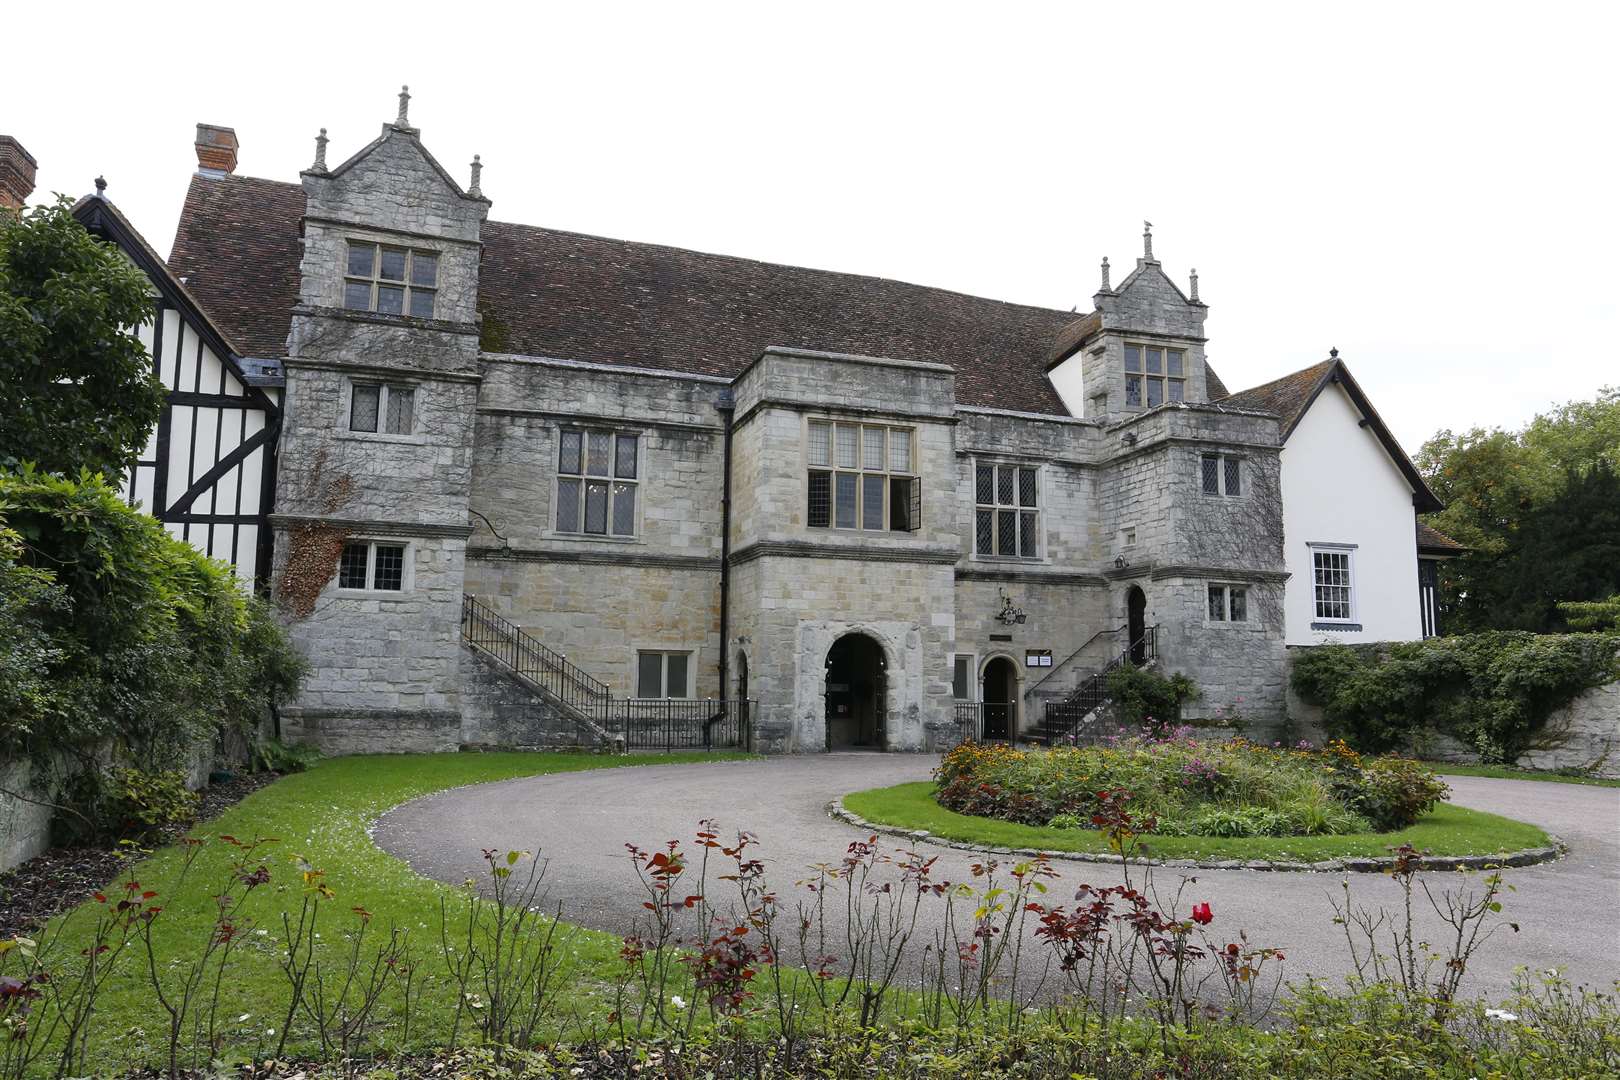 Carl Maynard's inquest was held at Archbishop's Palace in Maidstone